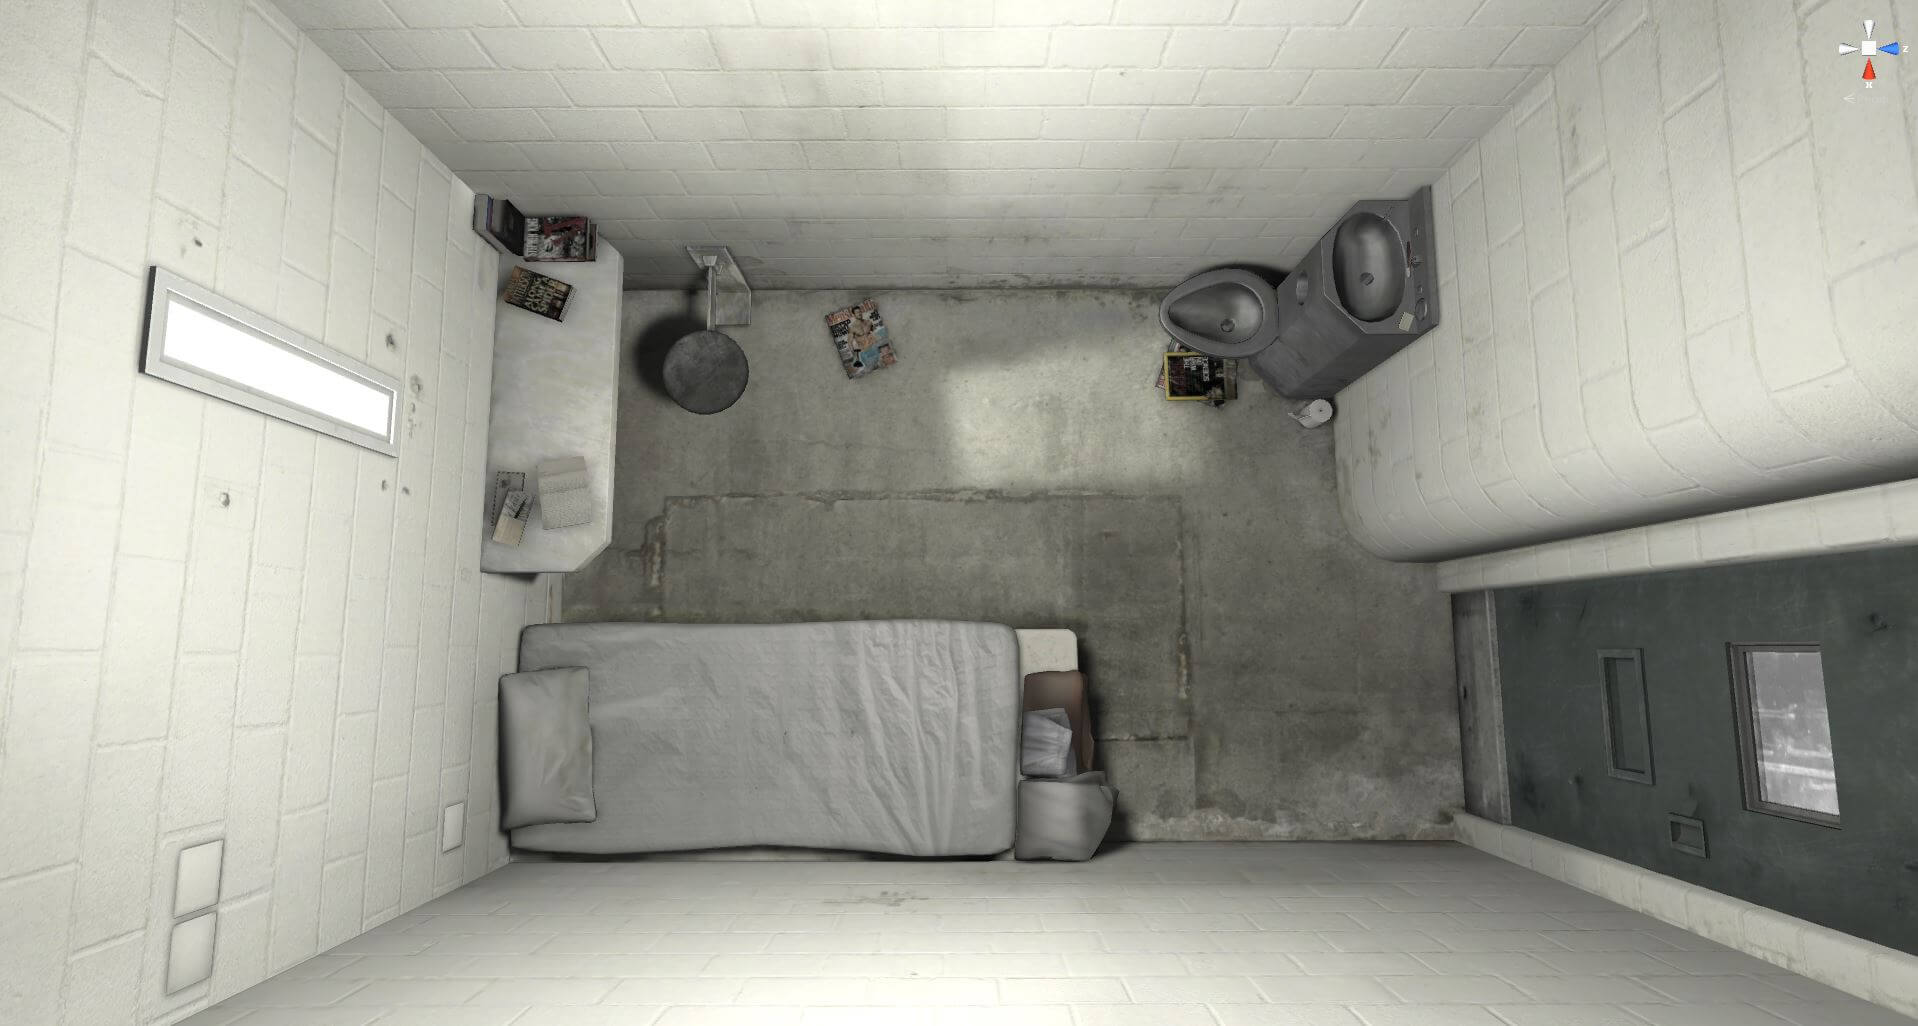 Still from An Immersive Experience of Solitary Confinement Impact & Innovation Initiative. Aerial shot of a prison cell: a bed with a bench, a shelf with some books, and a toilet, some magazines are spread over the floor.